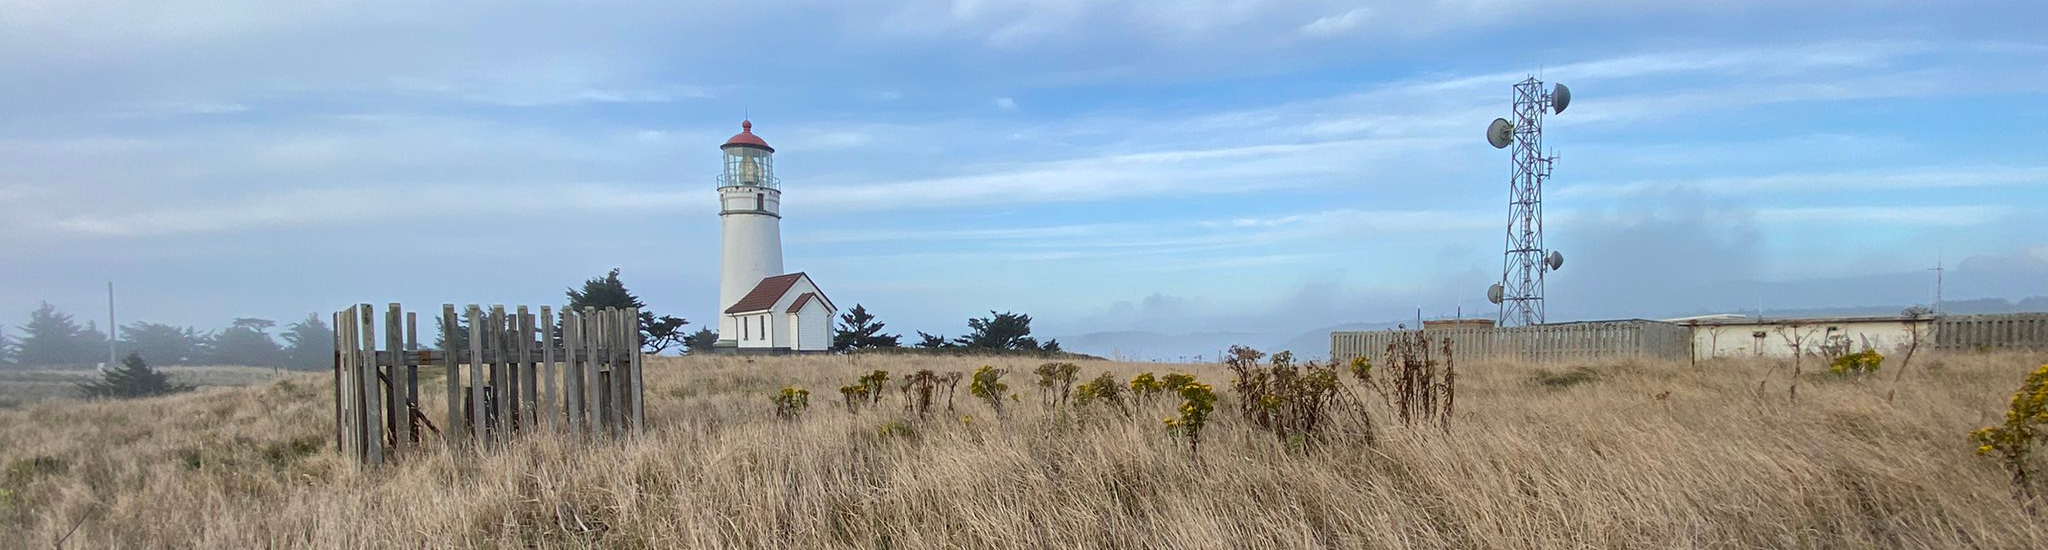 Cape Blanco Lighthouse by Rebecca Malamud-Evans